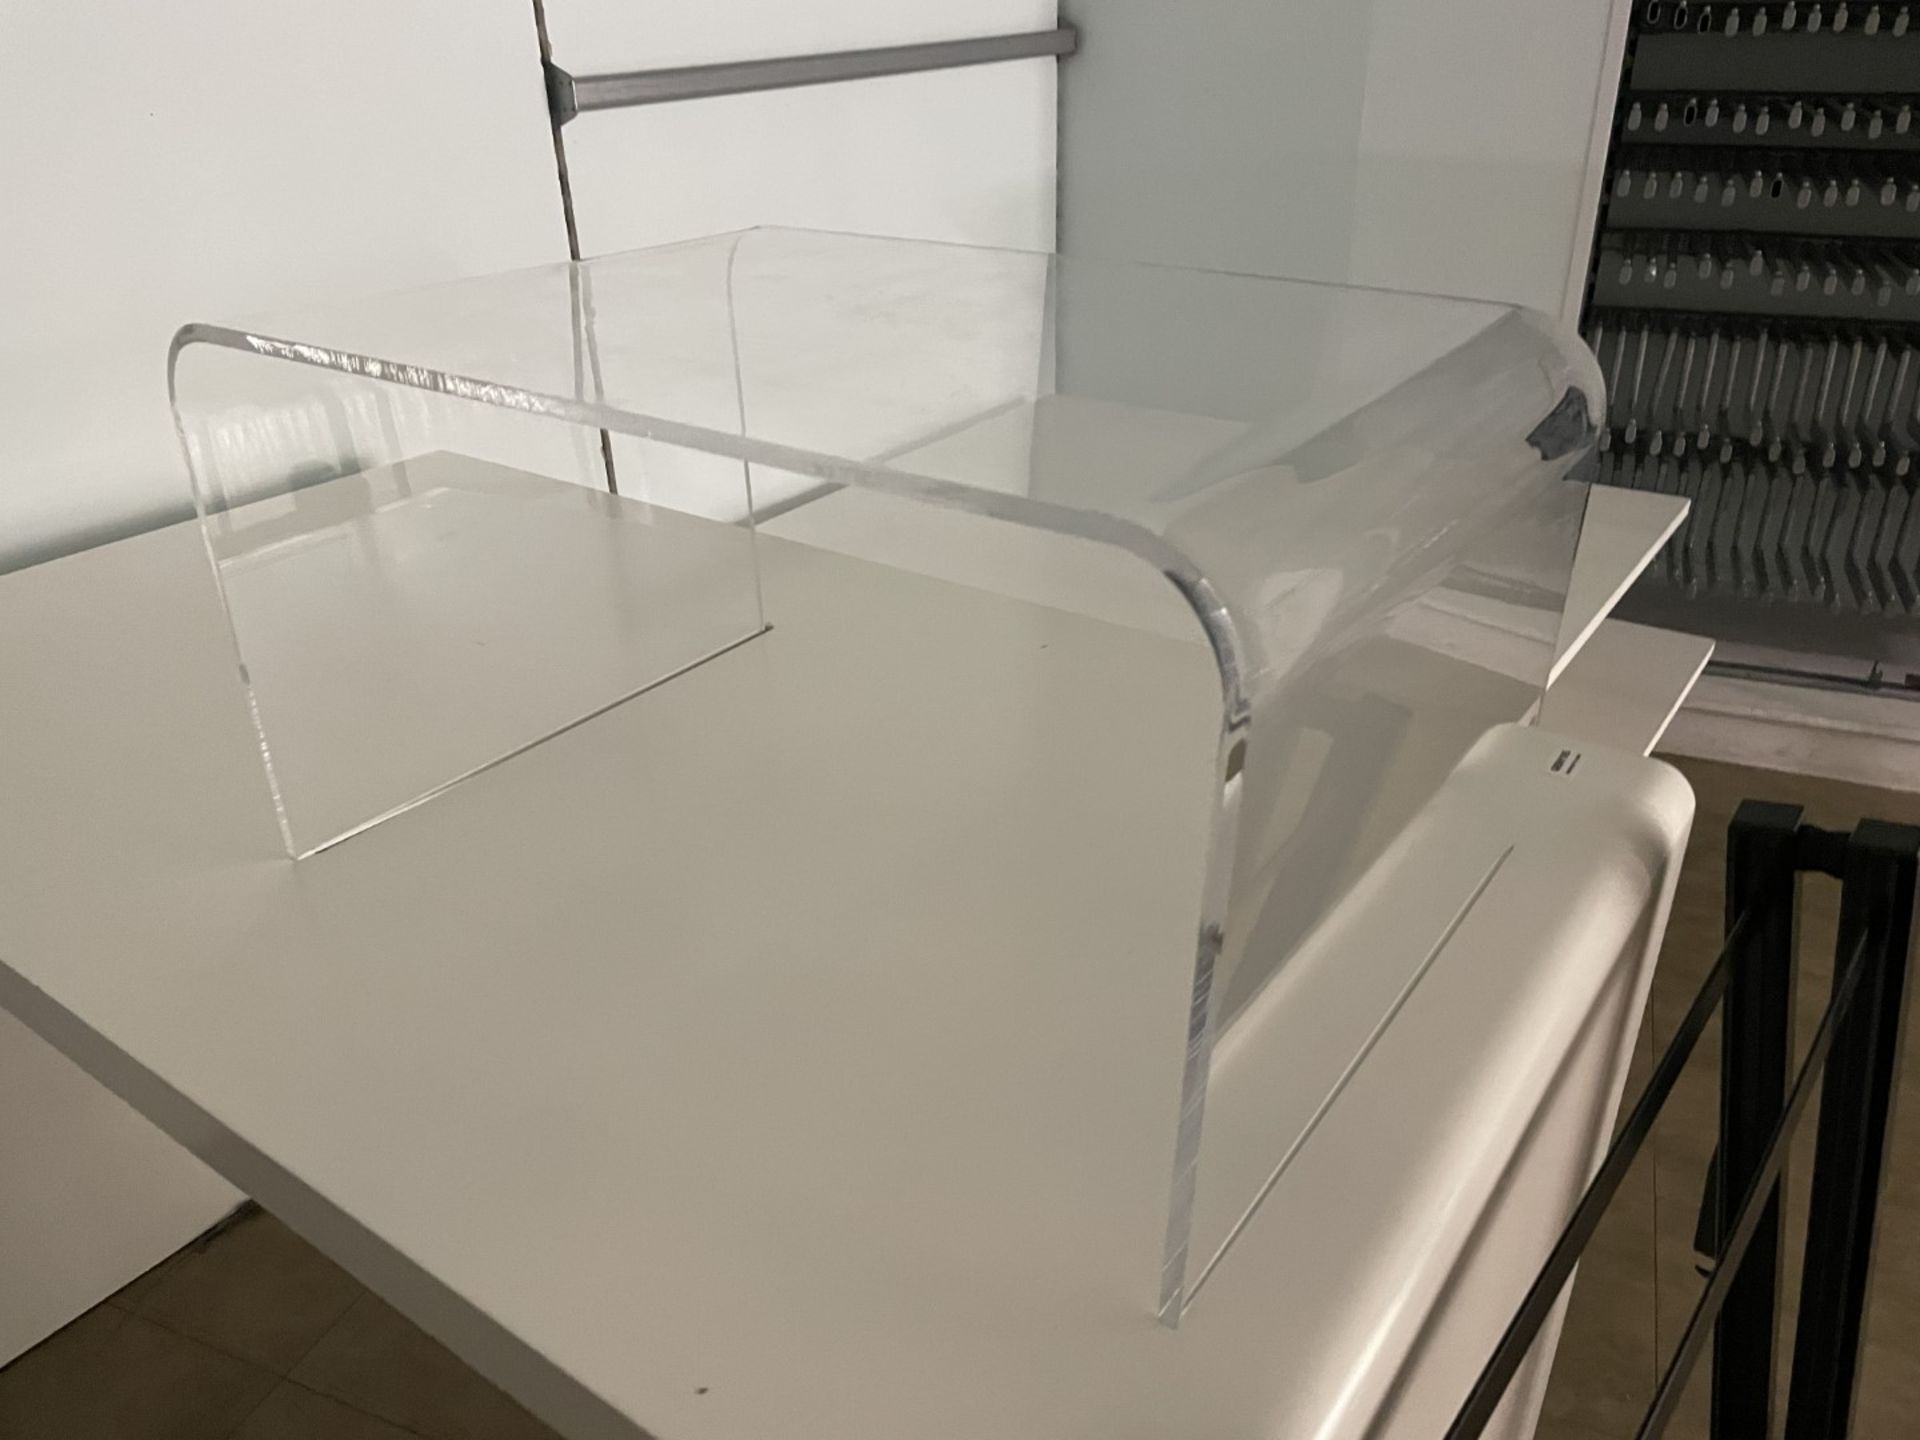 4 x Retail Display Units Including Acrylic Table, Low Two Tier Display - CL670 - Ref: GEM195 - - Image 2 of 7